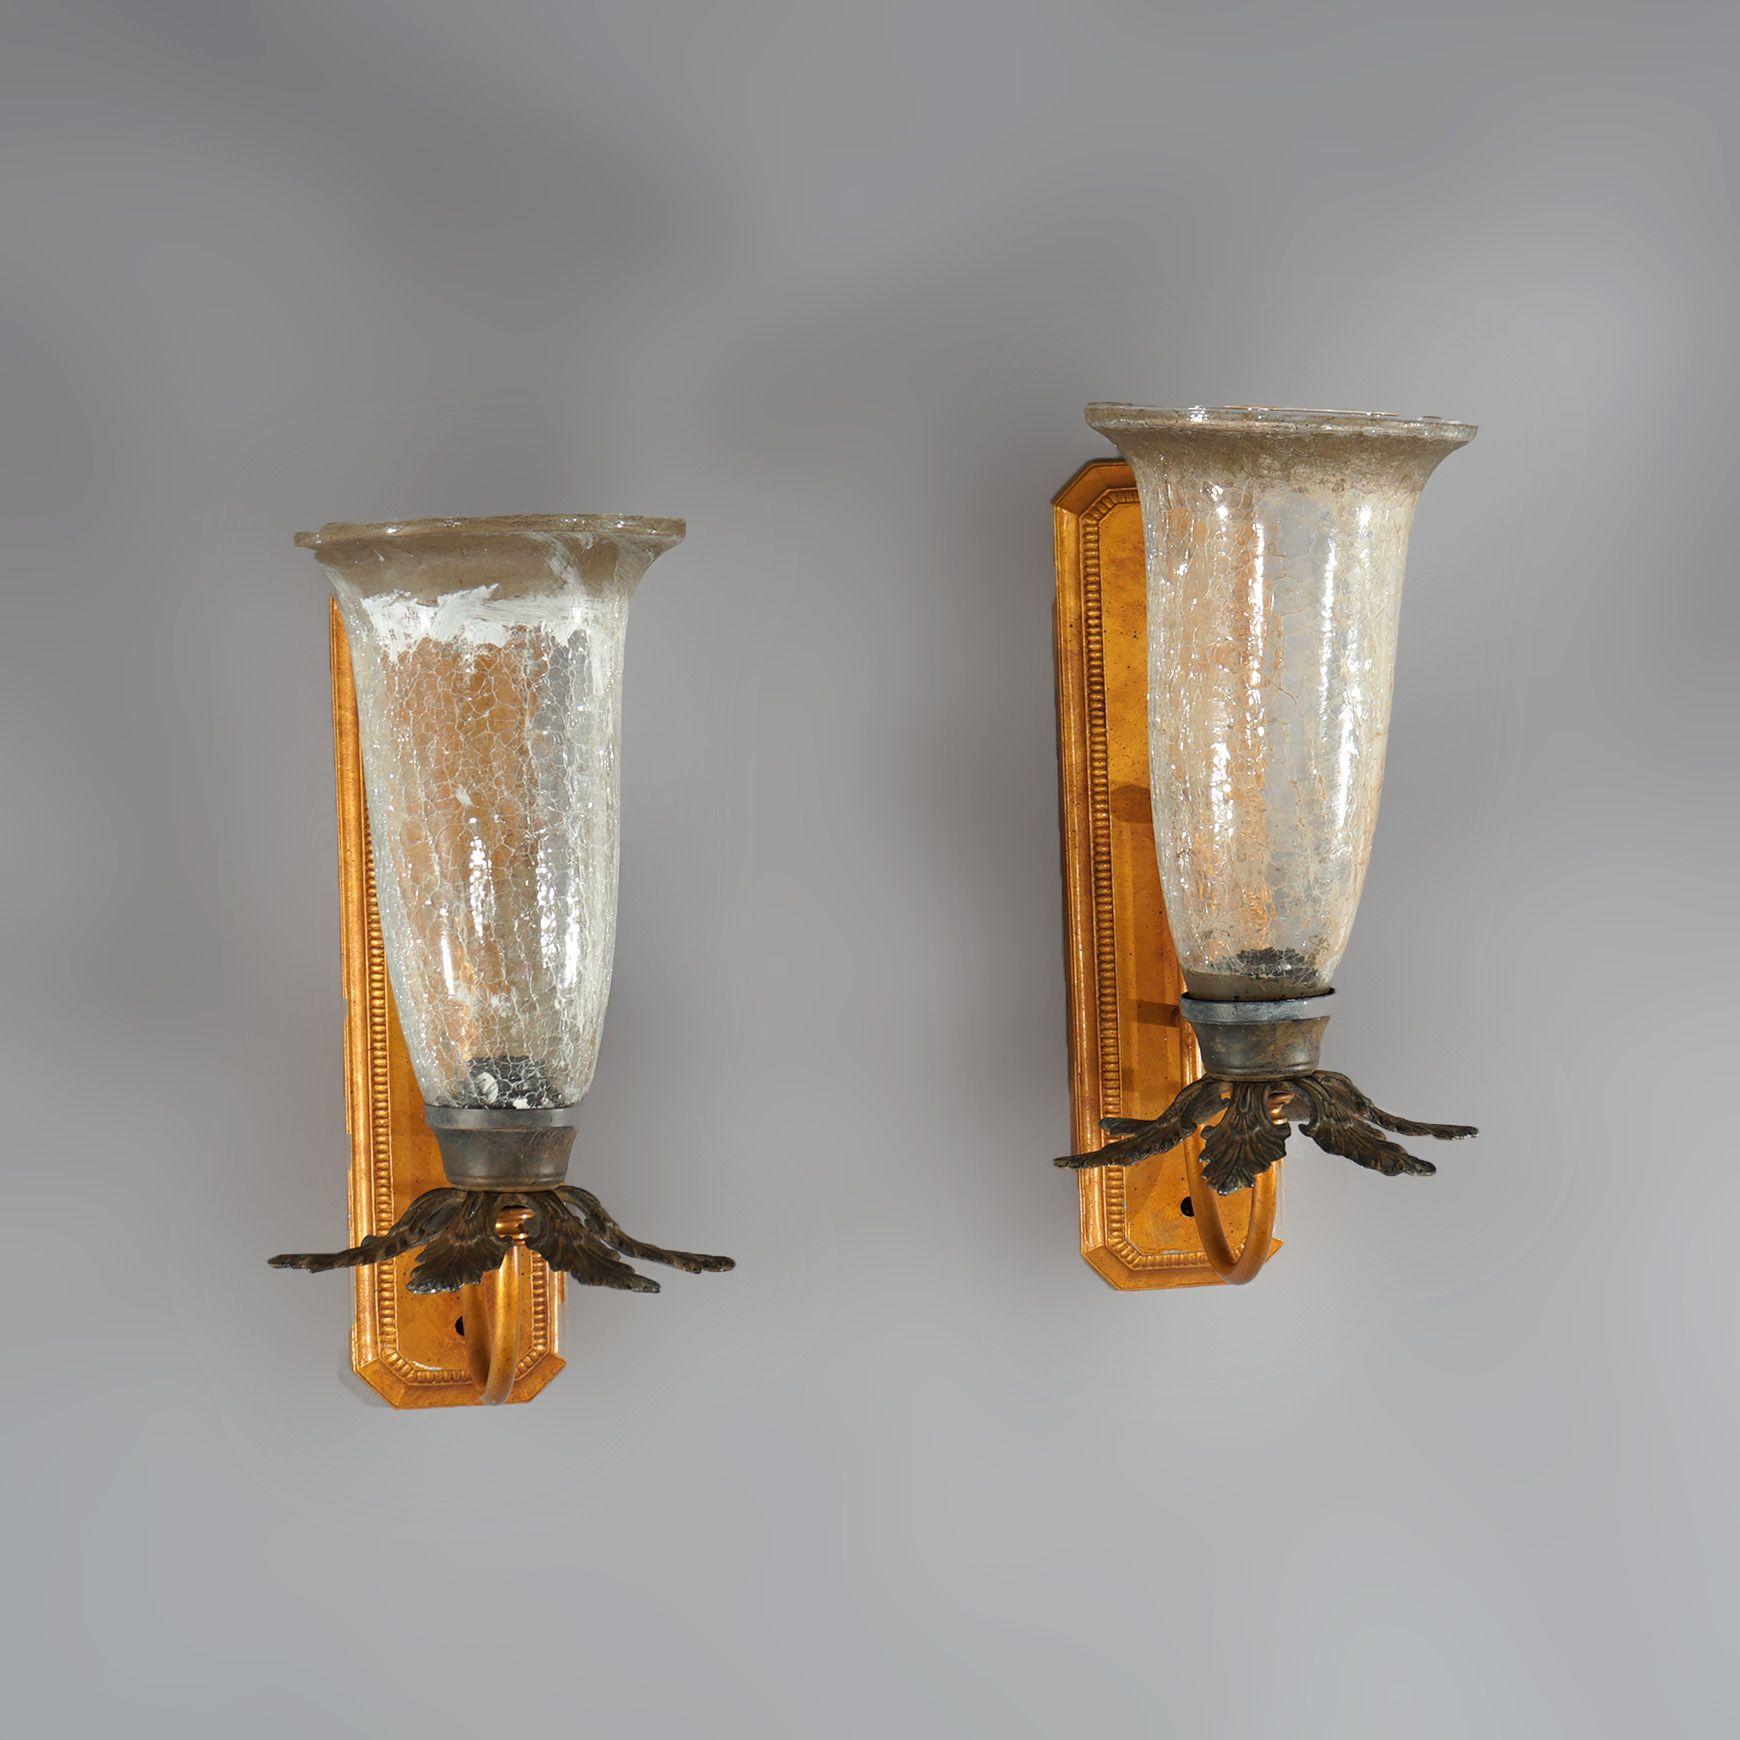 A pair of Mid-Century Modern French style Fleur-de-lis wall sconces with crackled glass shades, 20th century

Measures - 19